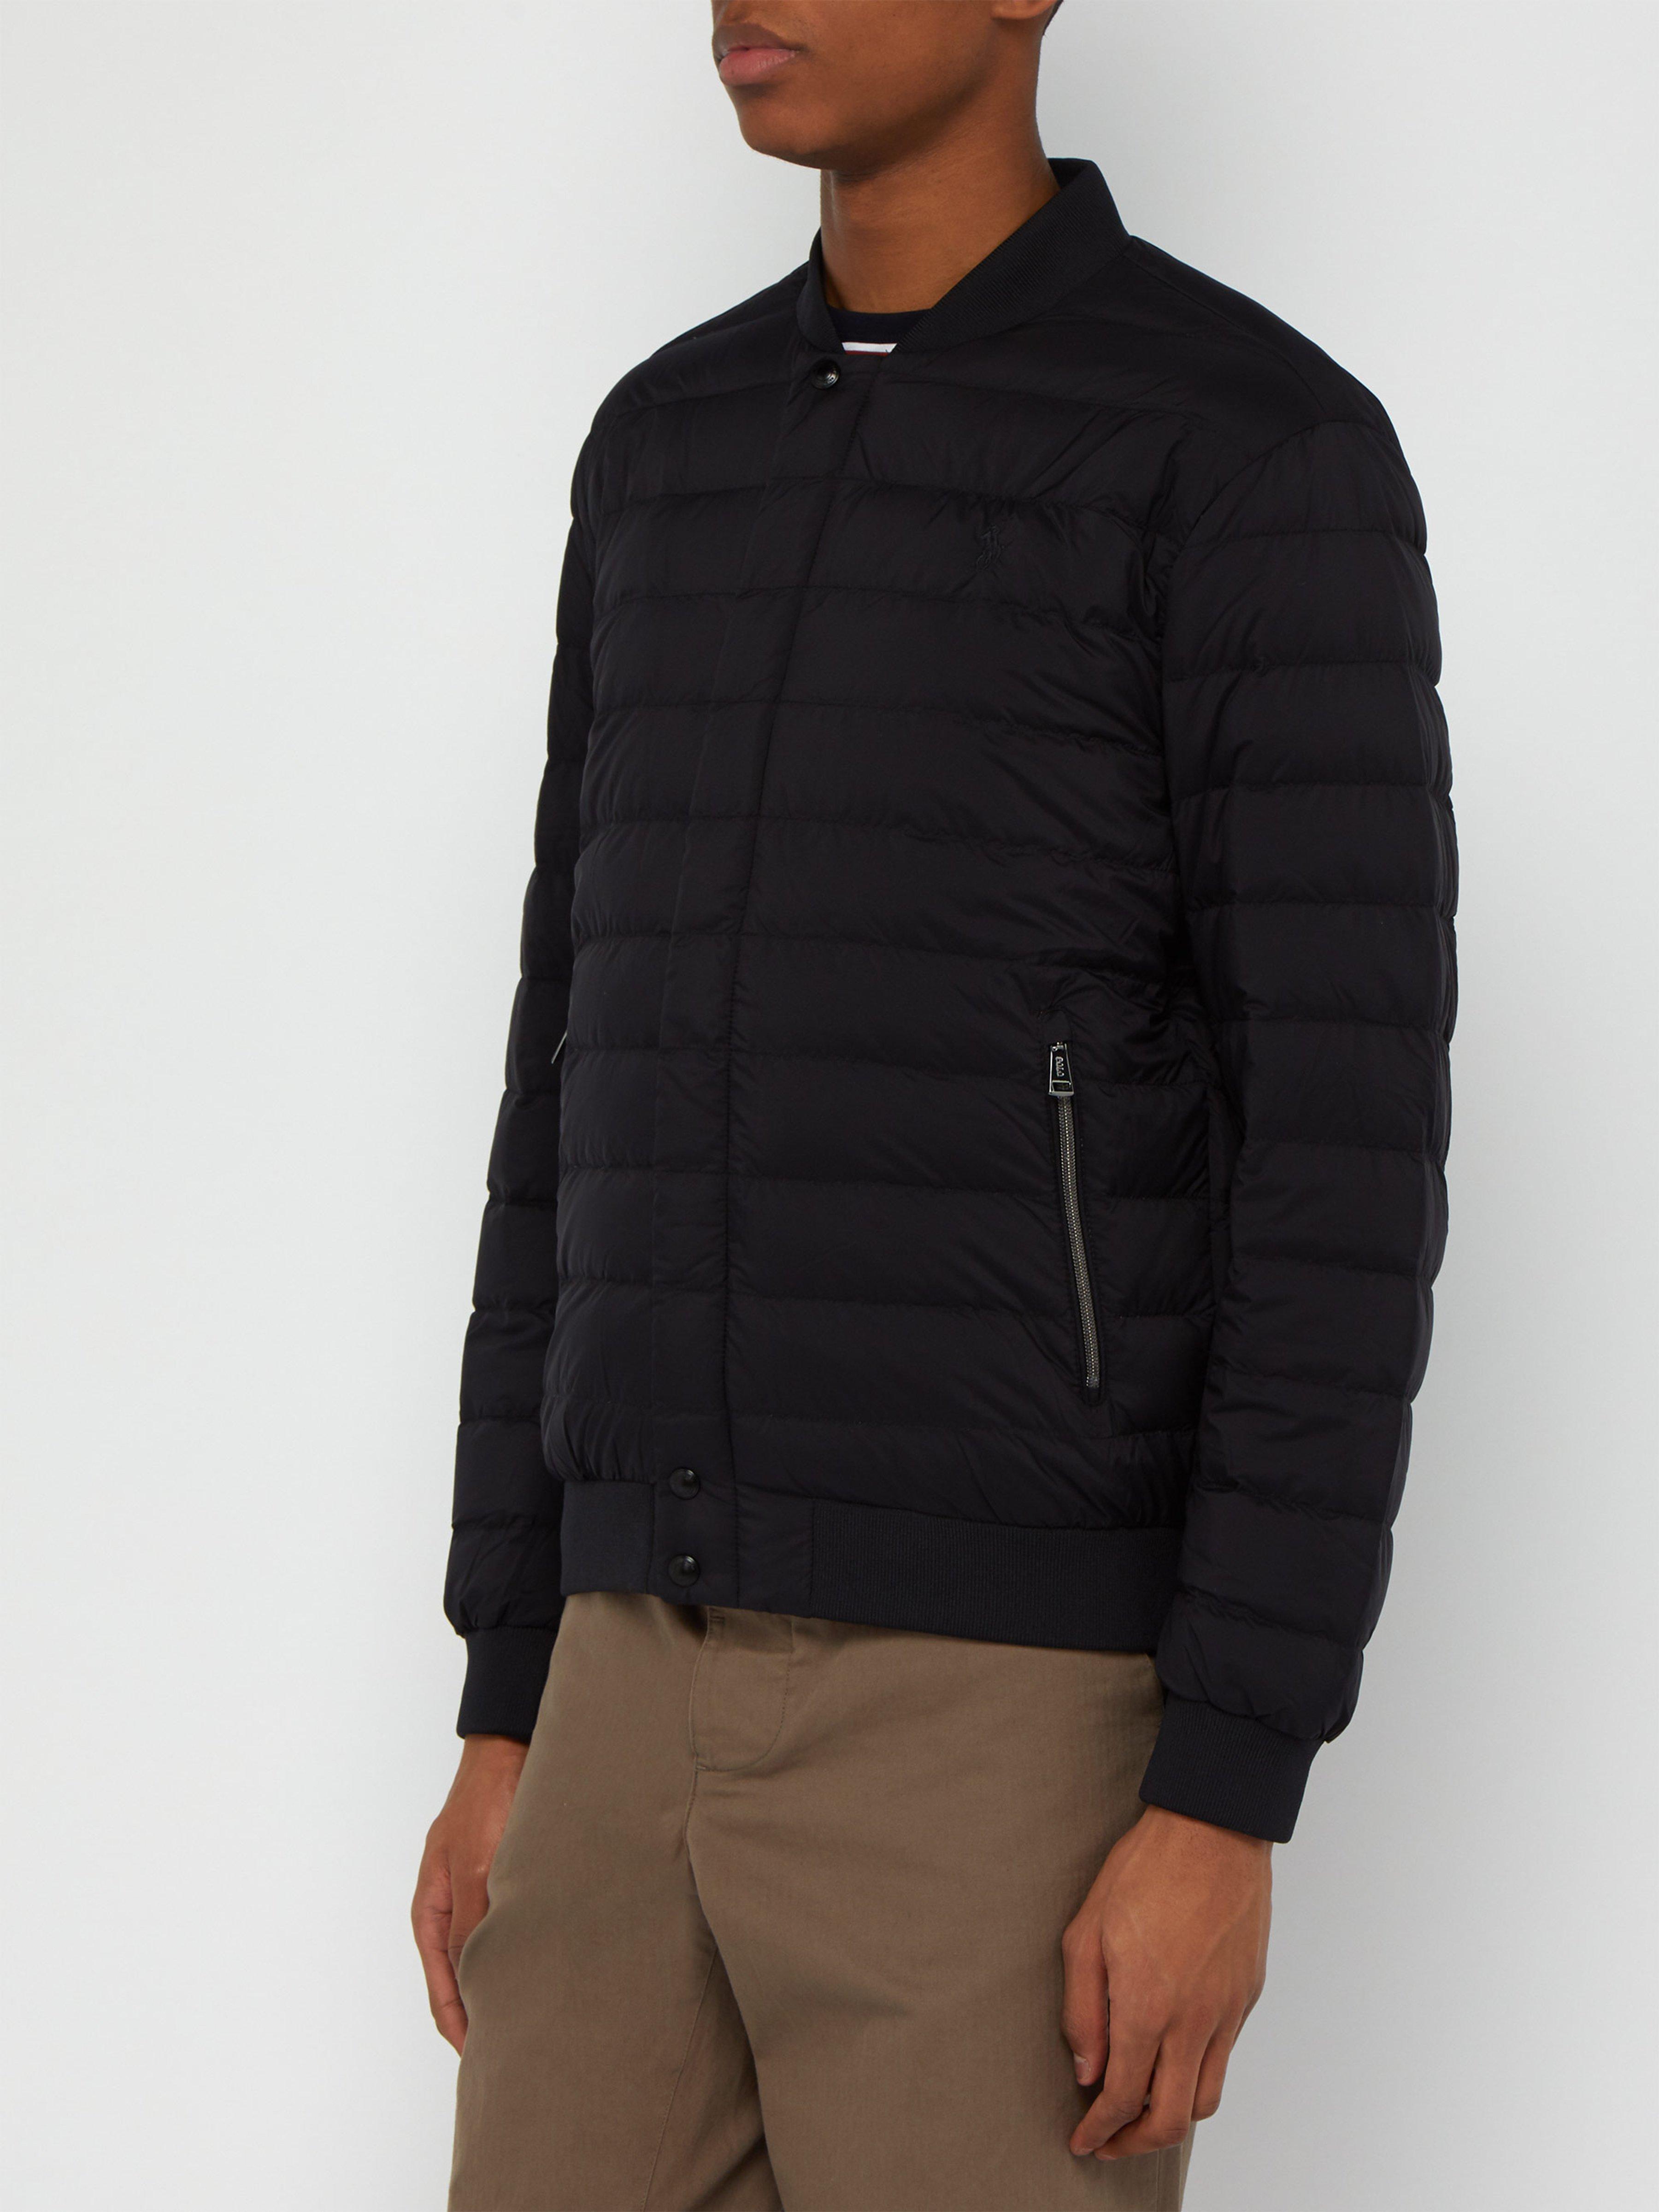 Polo Ralph Lauren Quilted Down Bomber Jacket in Black for Men - Lyst